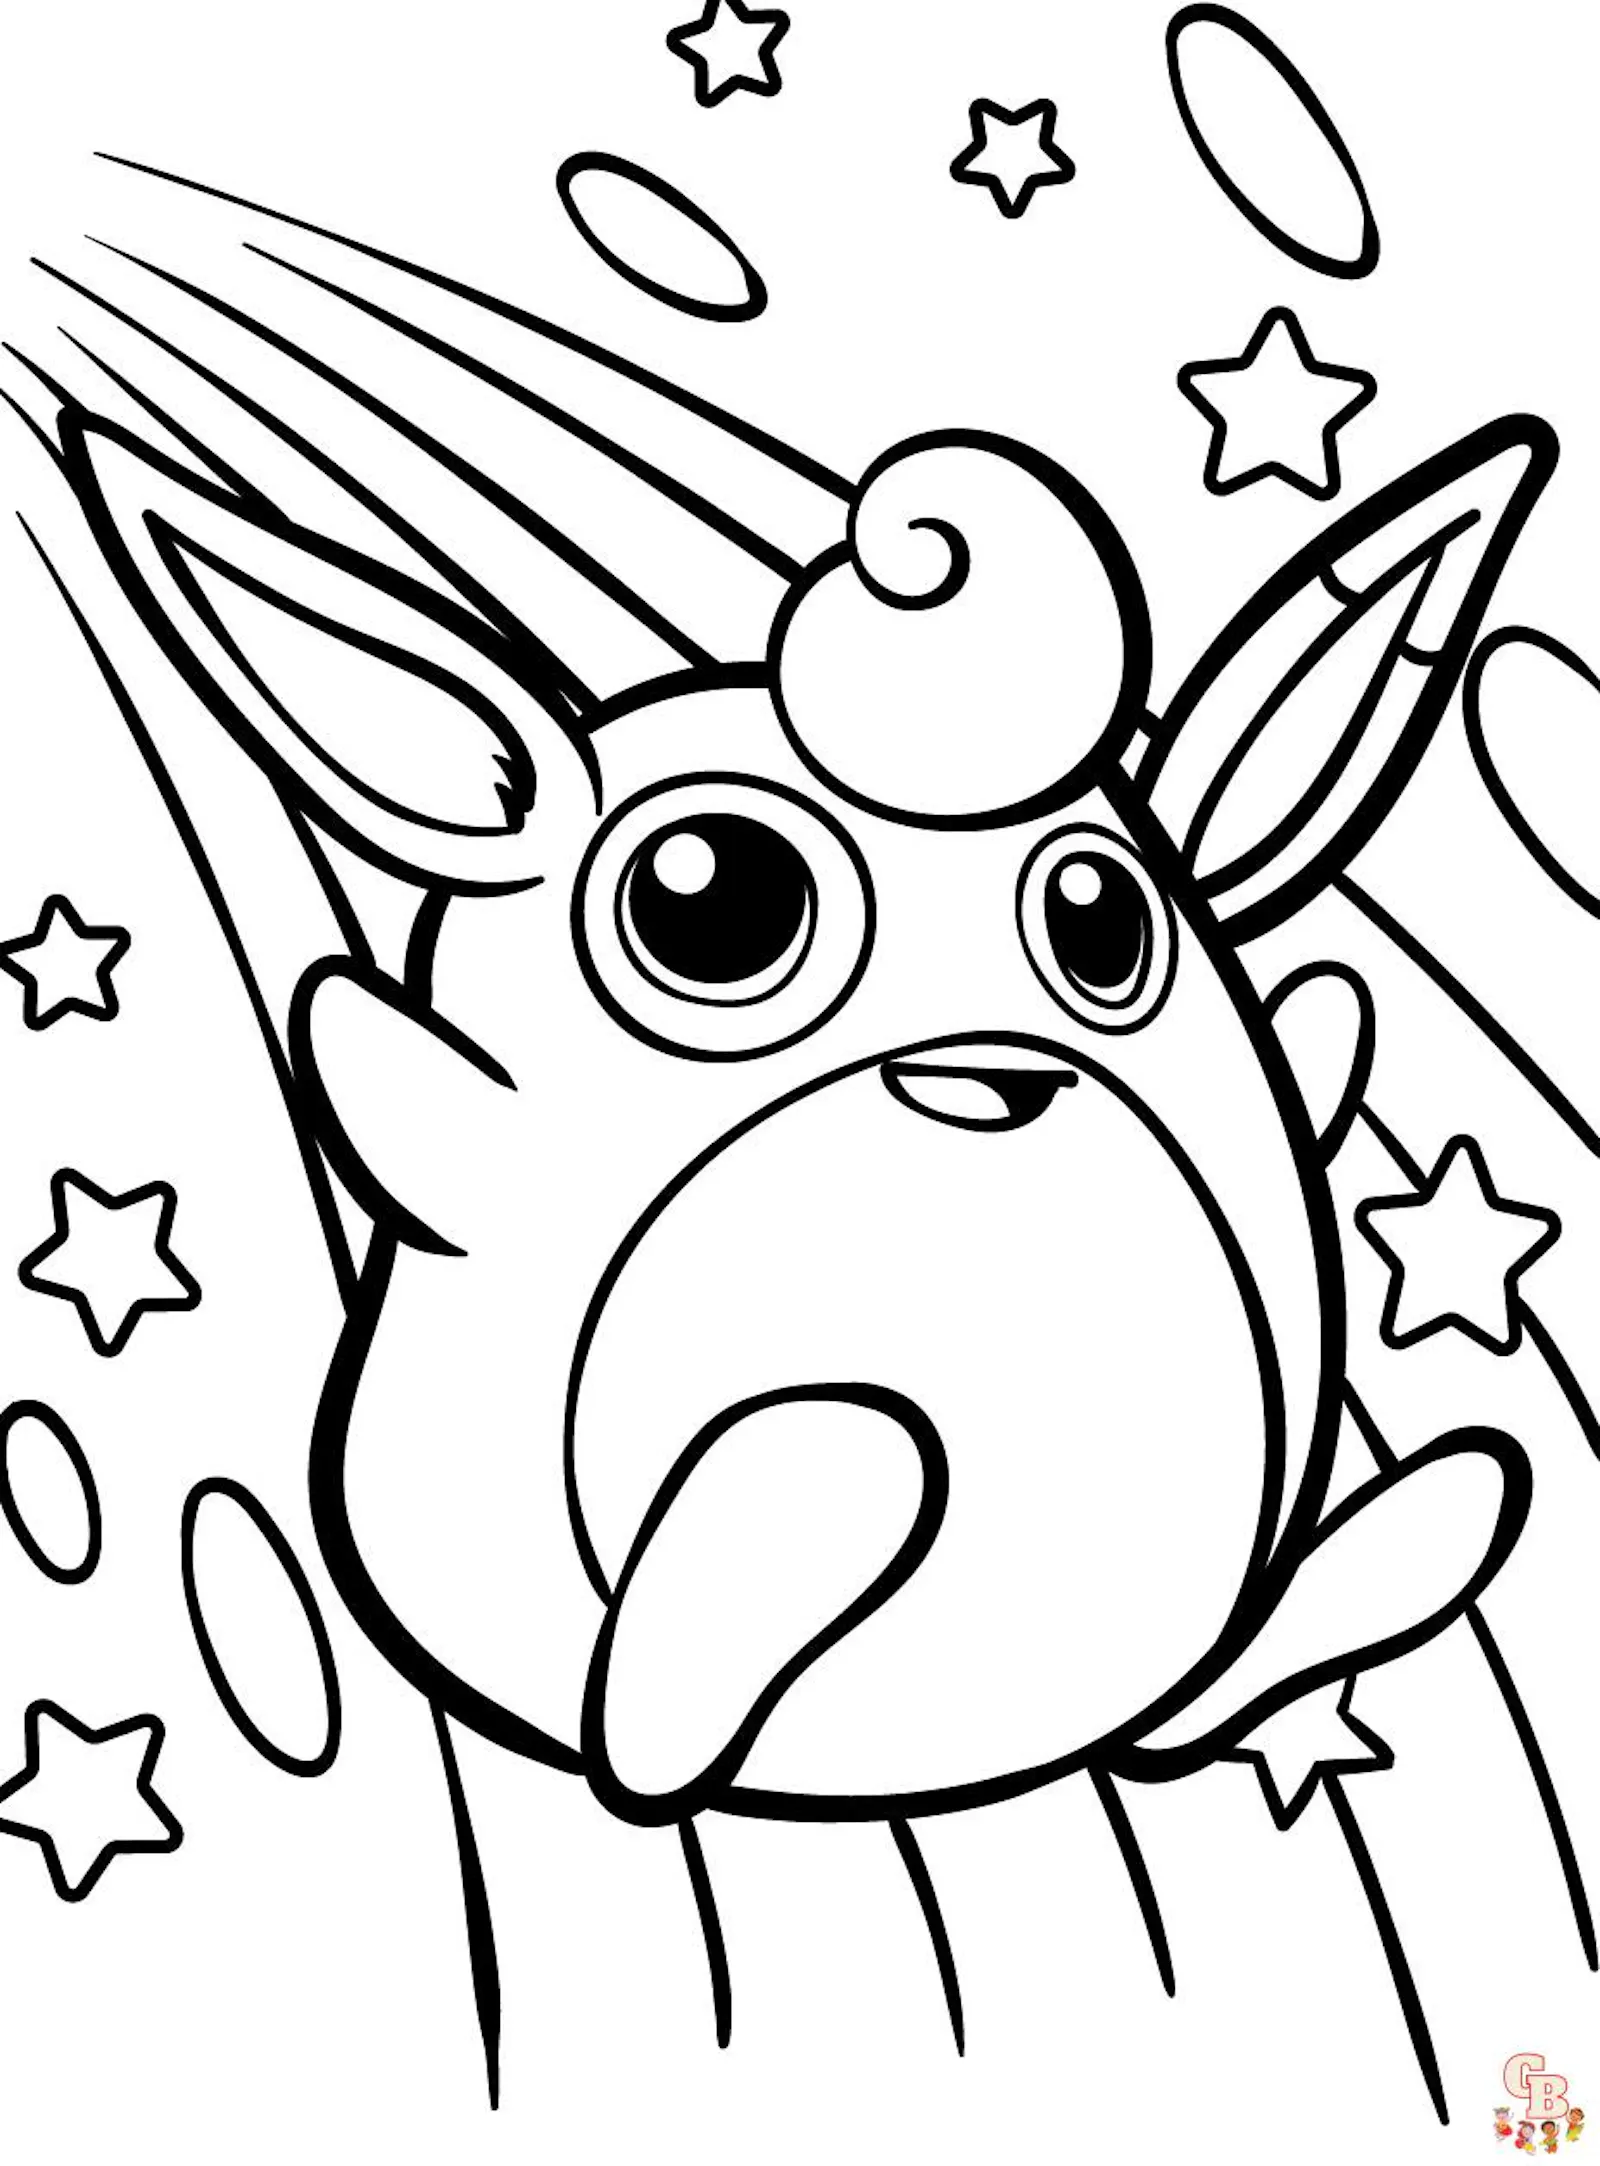 Free Printable Eevee Coloring Pages  Pokemon coloring pages, Pokemon  coloring, Pokemon coloring sheets